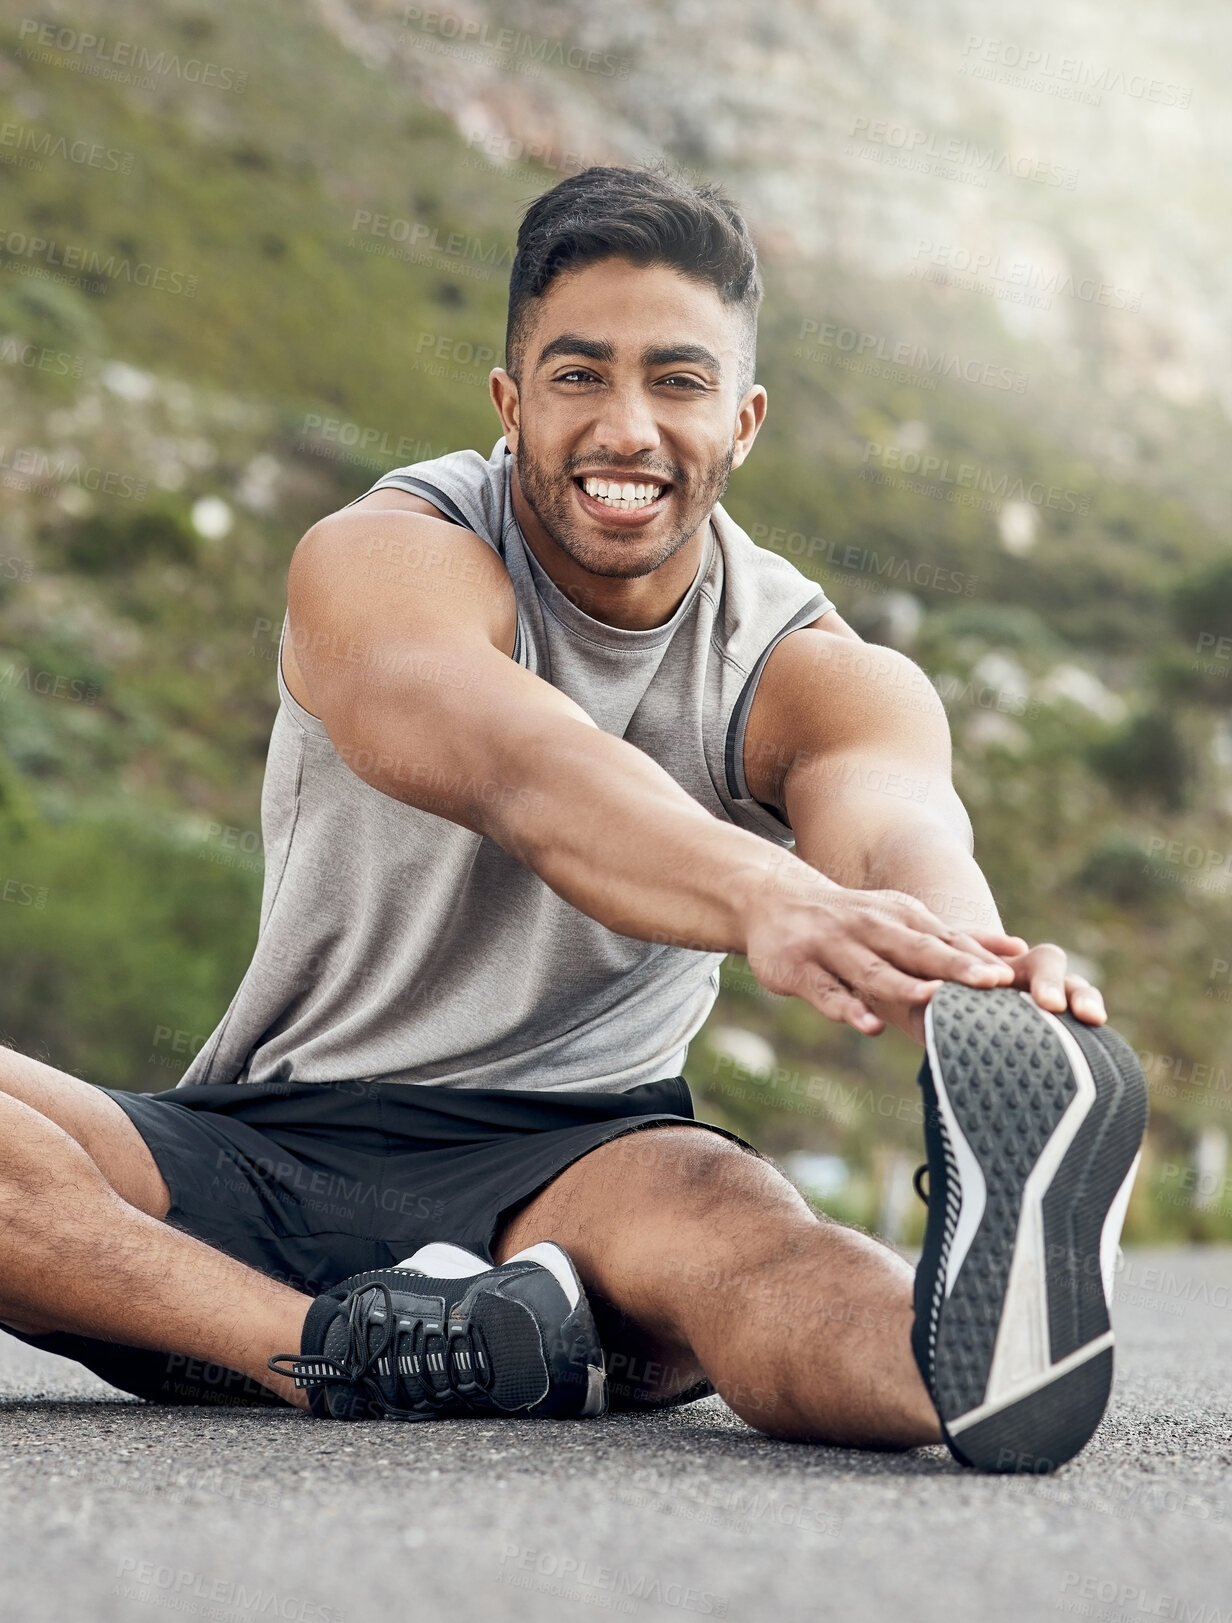 Buy stock photo Shot of an athletic young man stretching on a mountain road